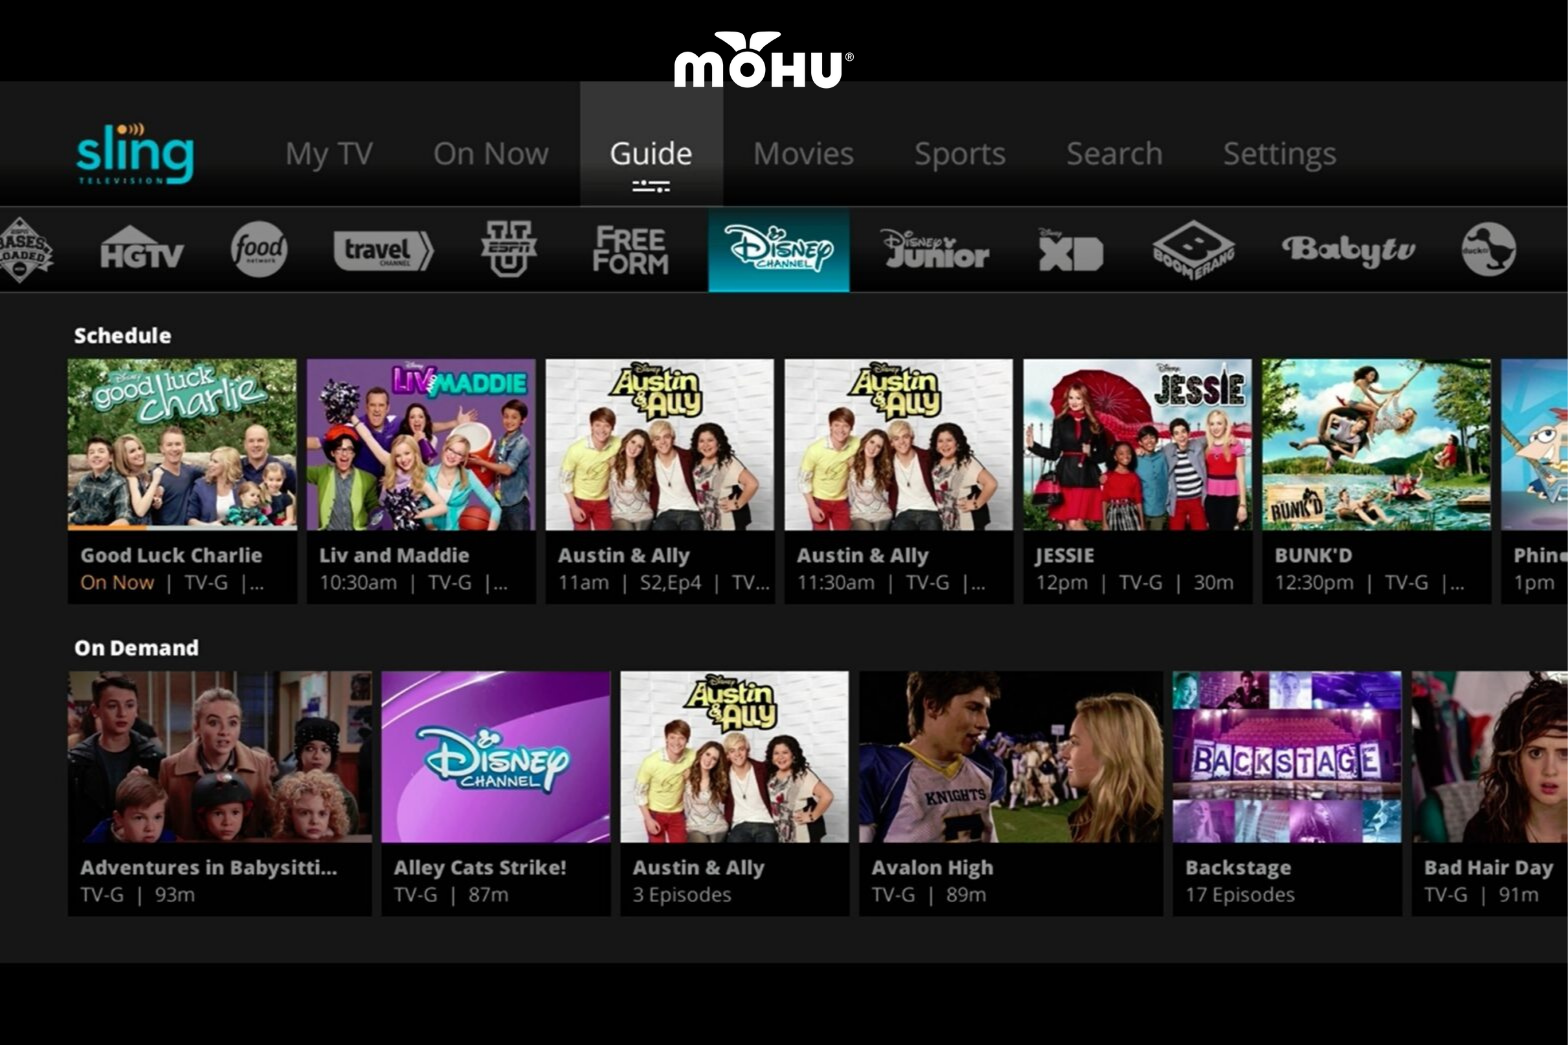 dish network video on demand movies